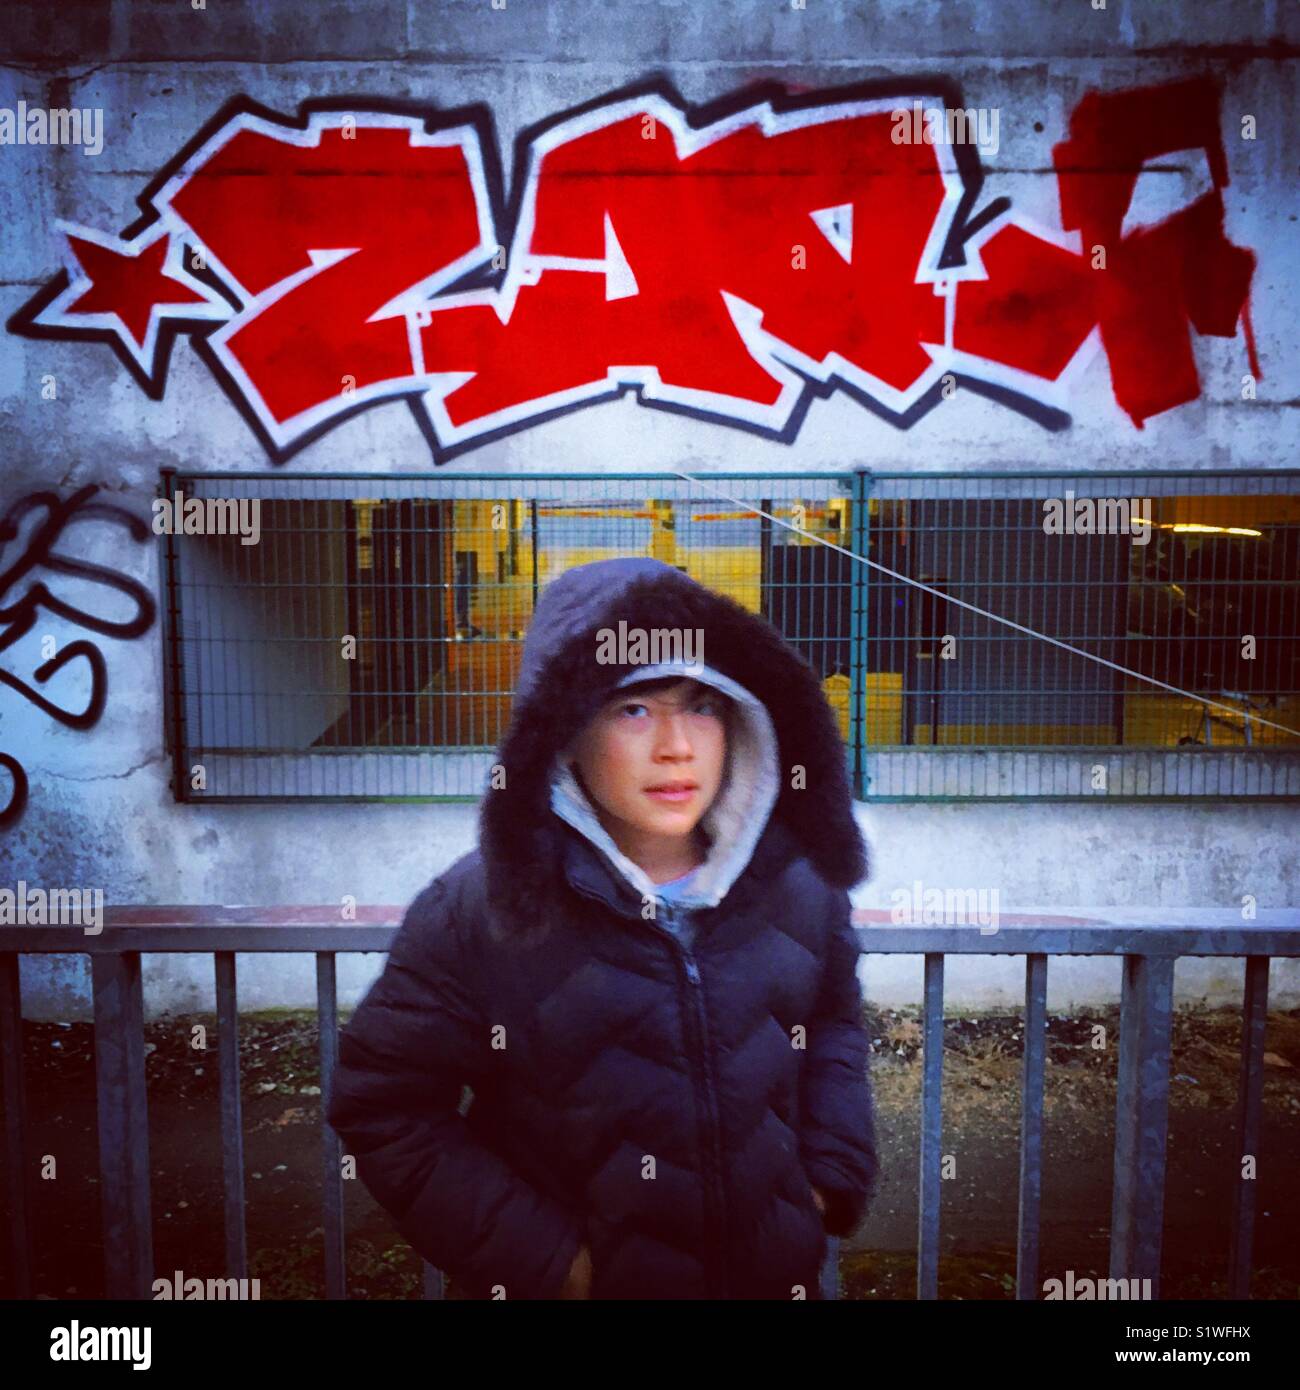 kid posing in front of a grafiti or tag in paris Stock Photo